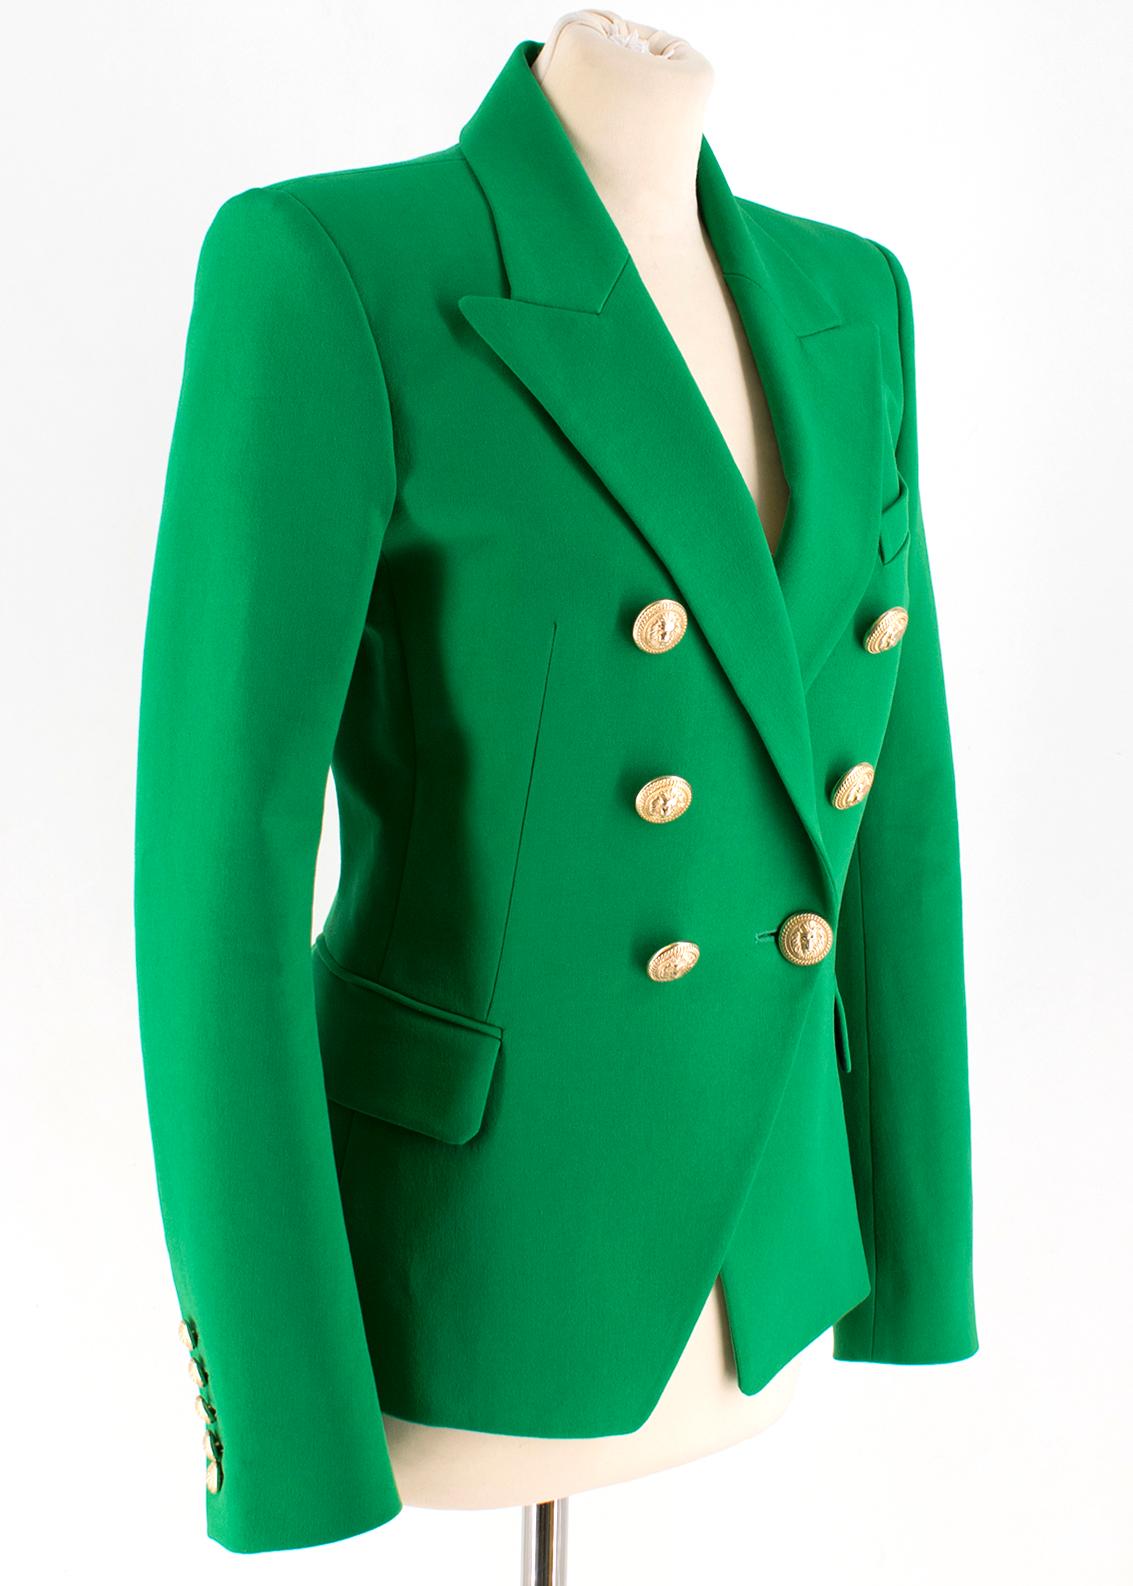 Balmain Green Double-Breasted Blazer

- Oversized gold buttons
- Peaked lapels
- Double breasted button closure
- Button cuffs
- Gold colored buttons with lion and chain pattern
- Padded shoulders
- One breast pocket
- Two side flap pockets
- Lining